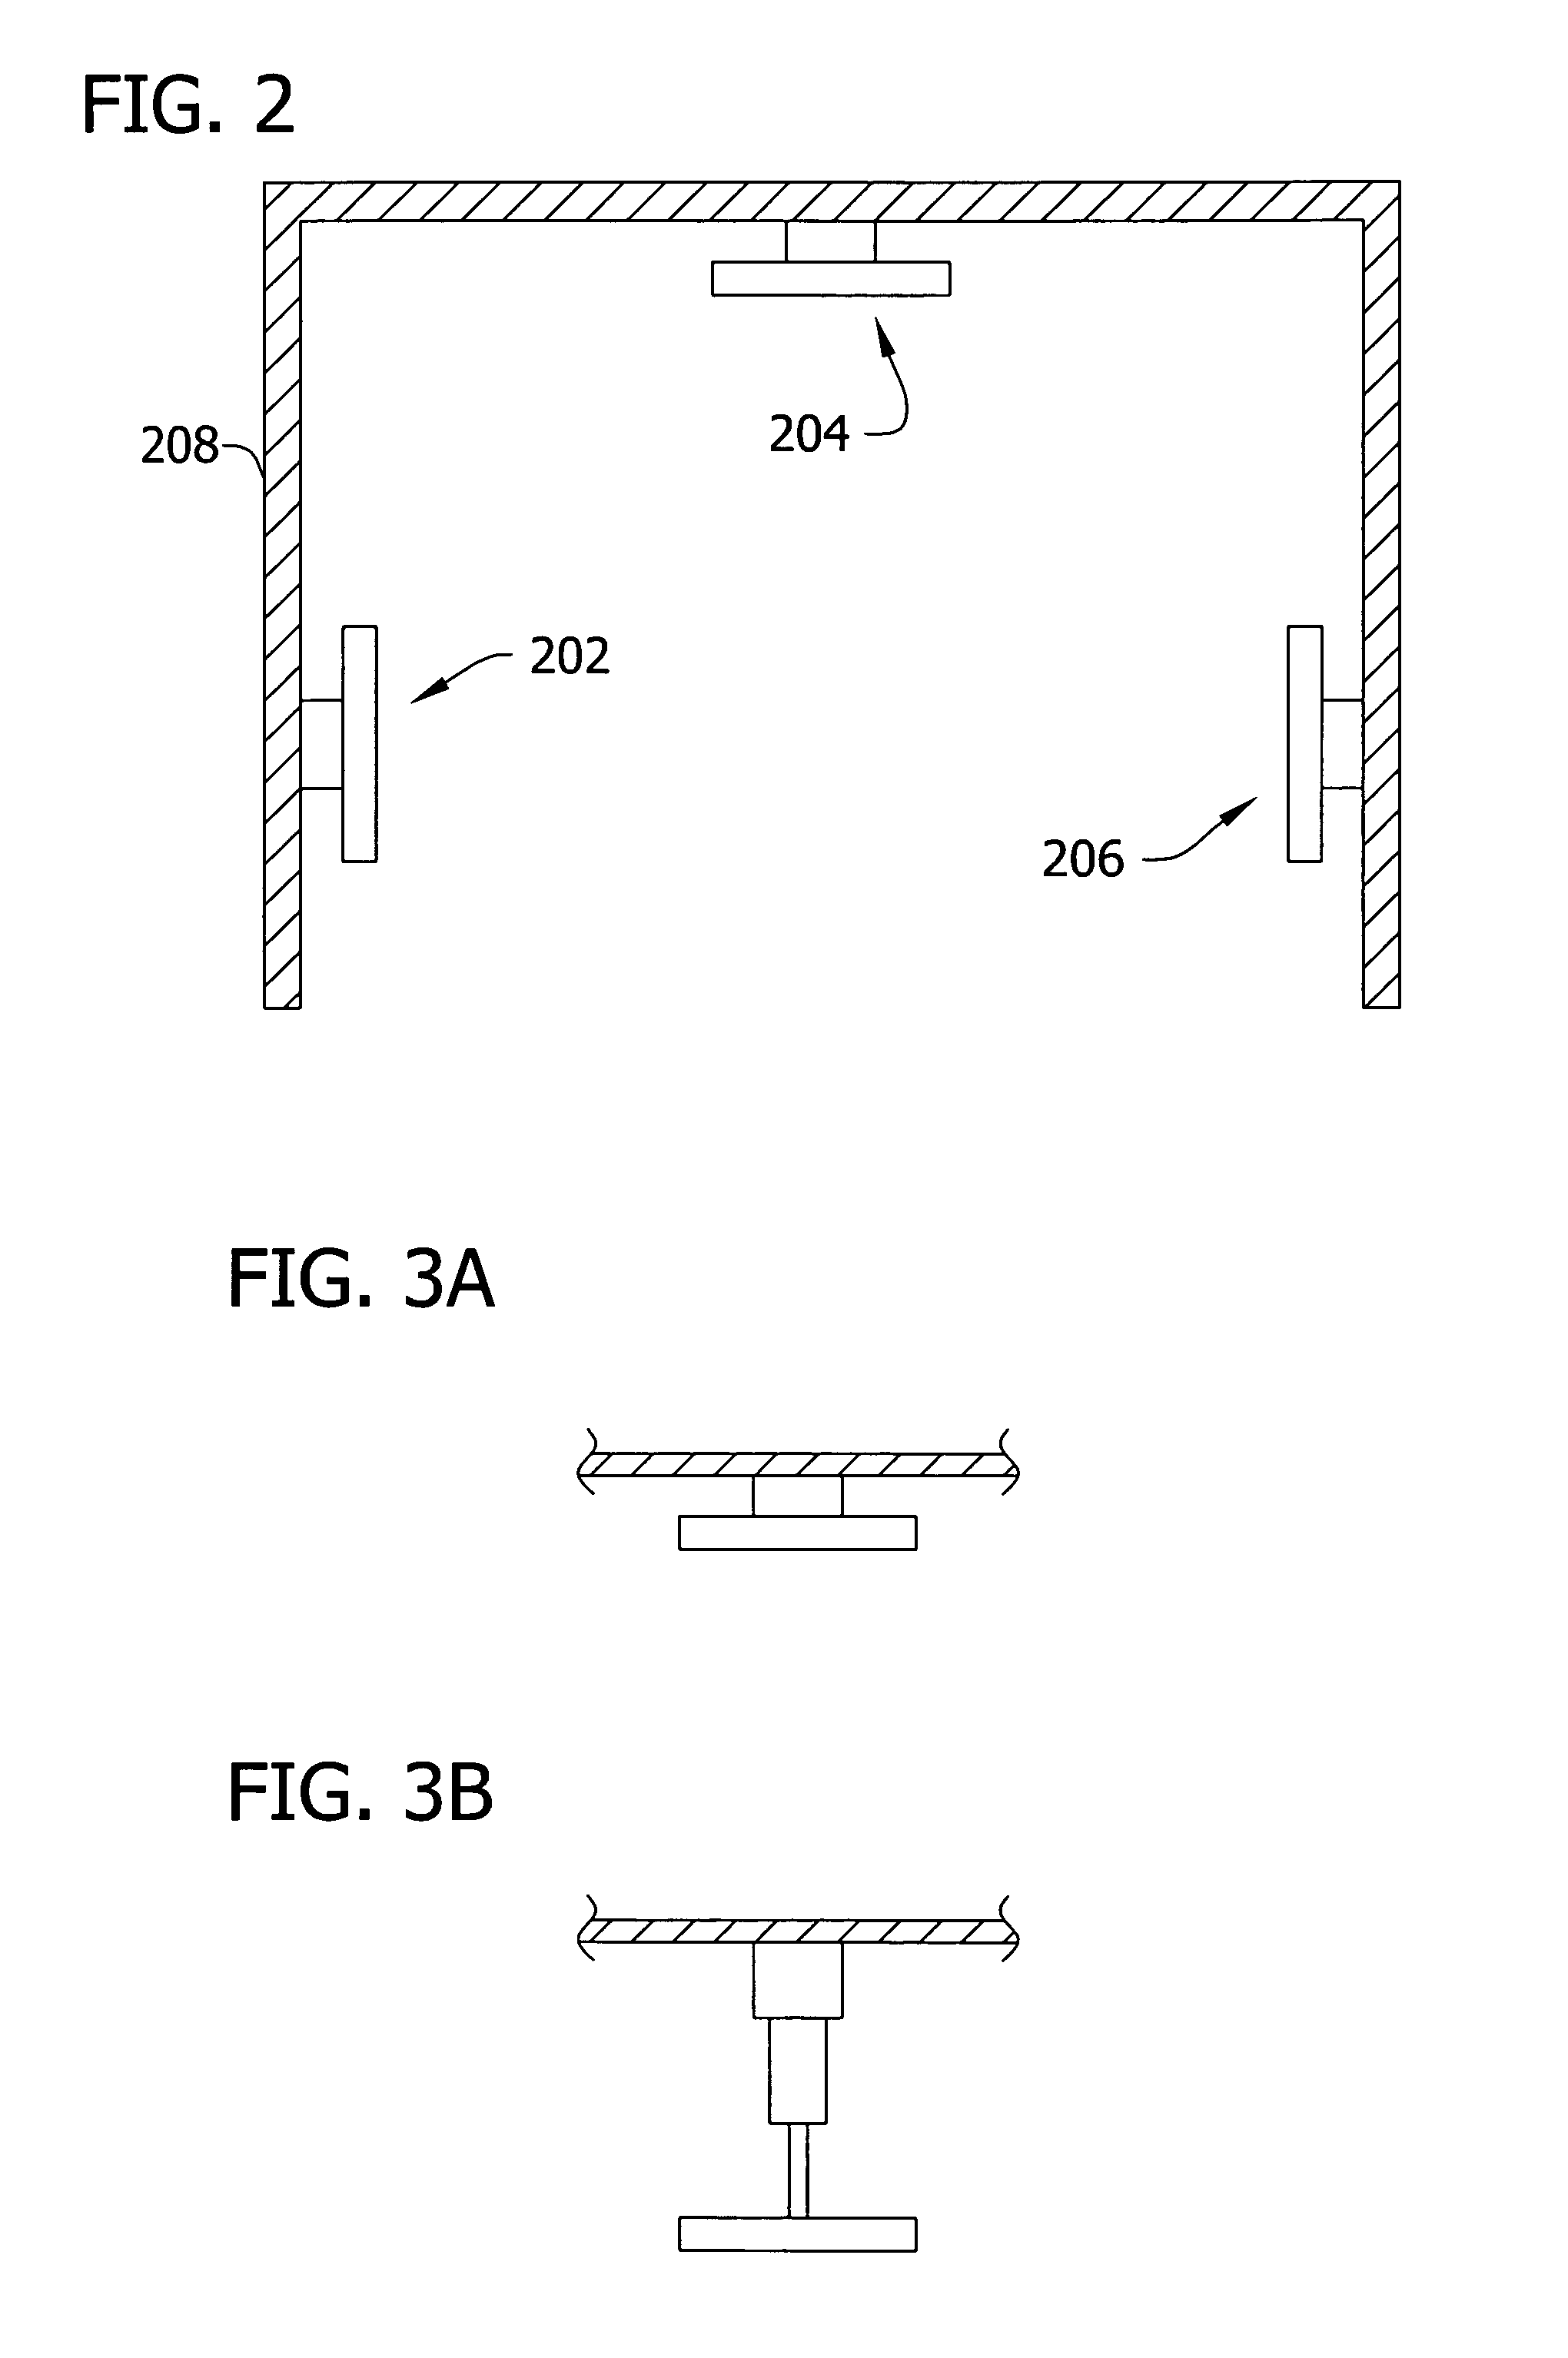 Self-adjusting portals with movable data tag readers for improved reading of data tags